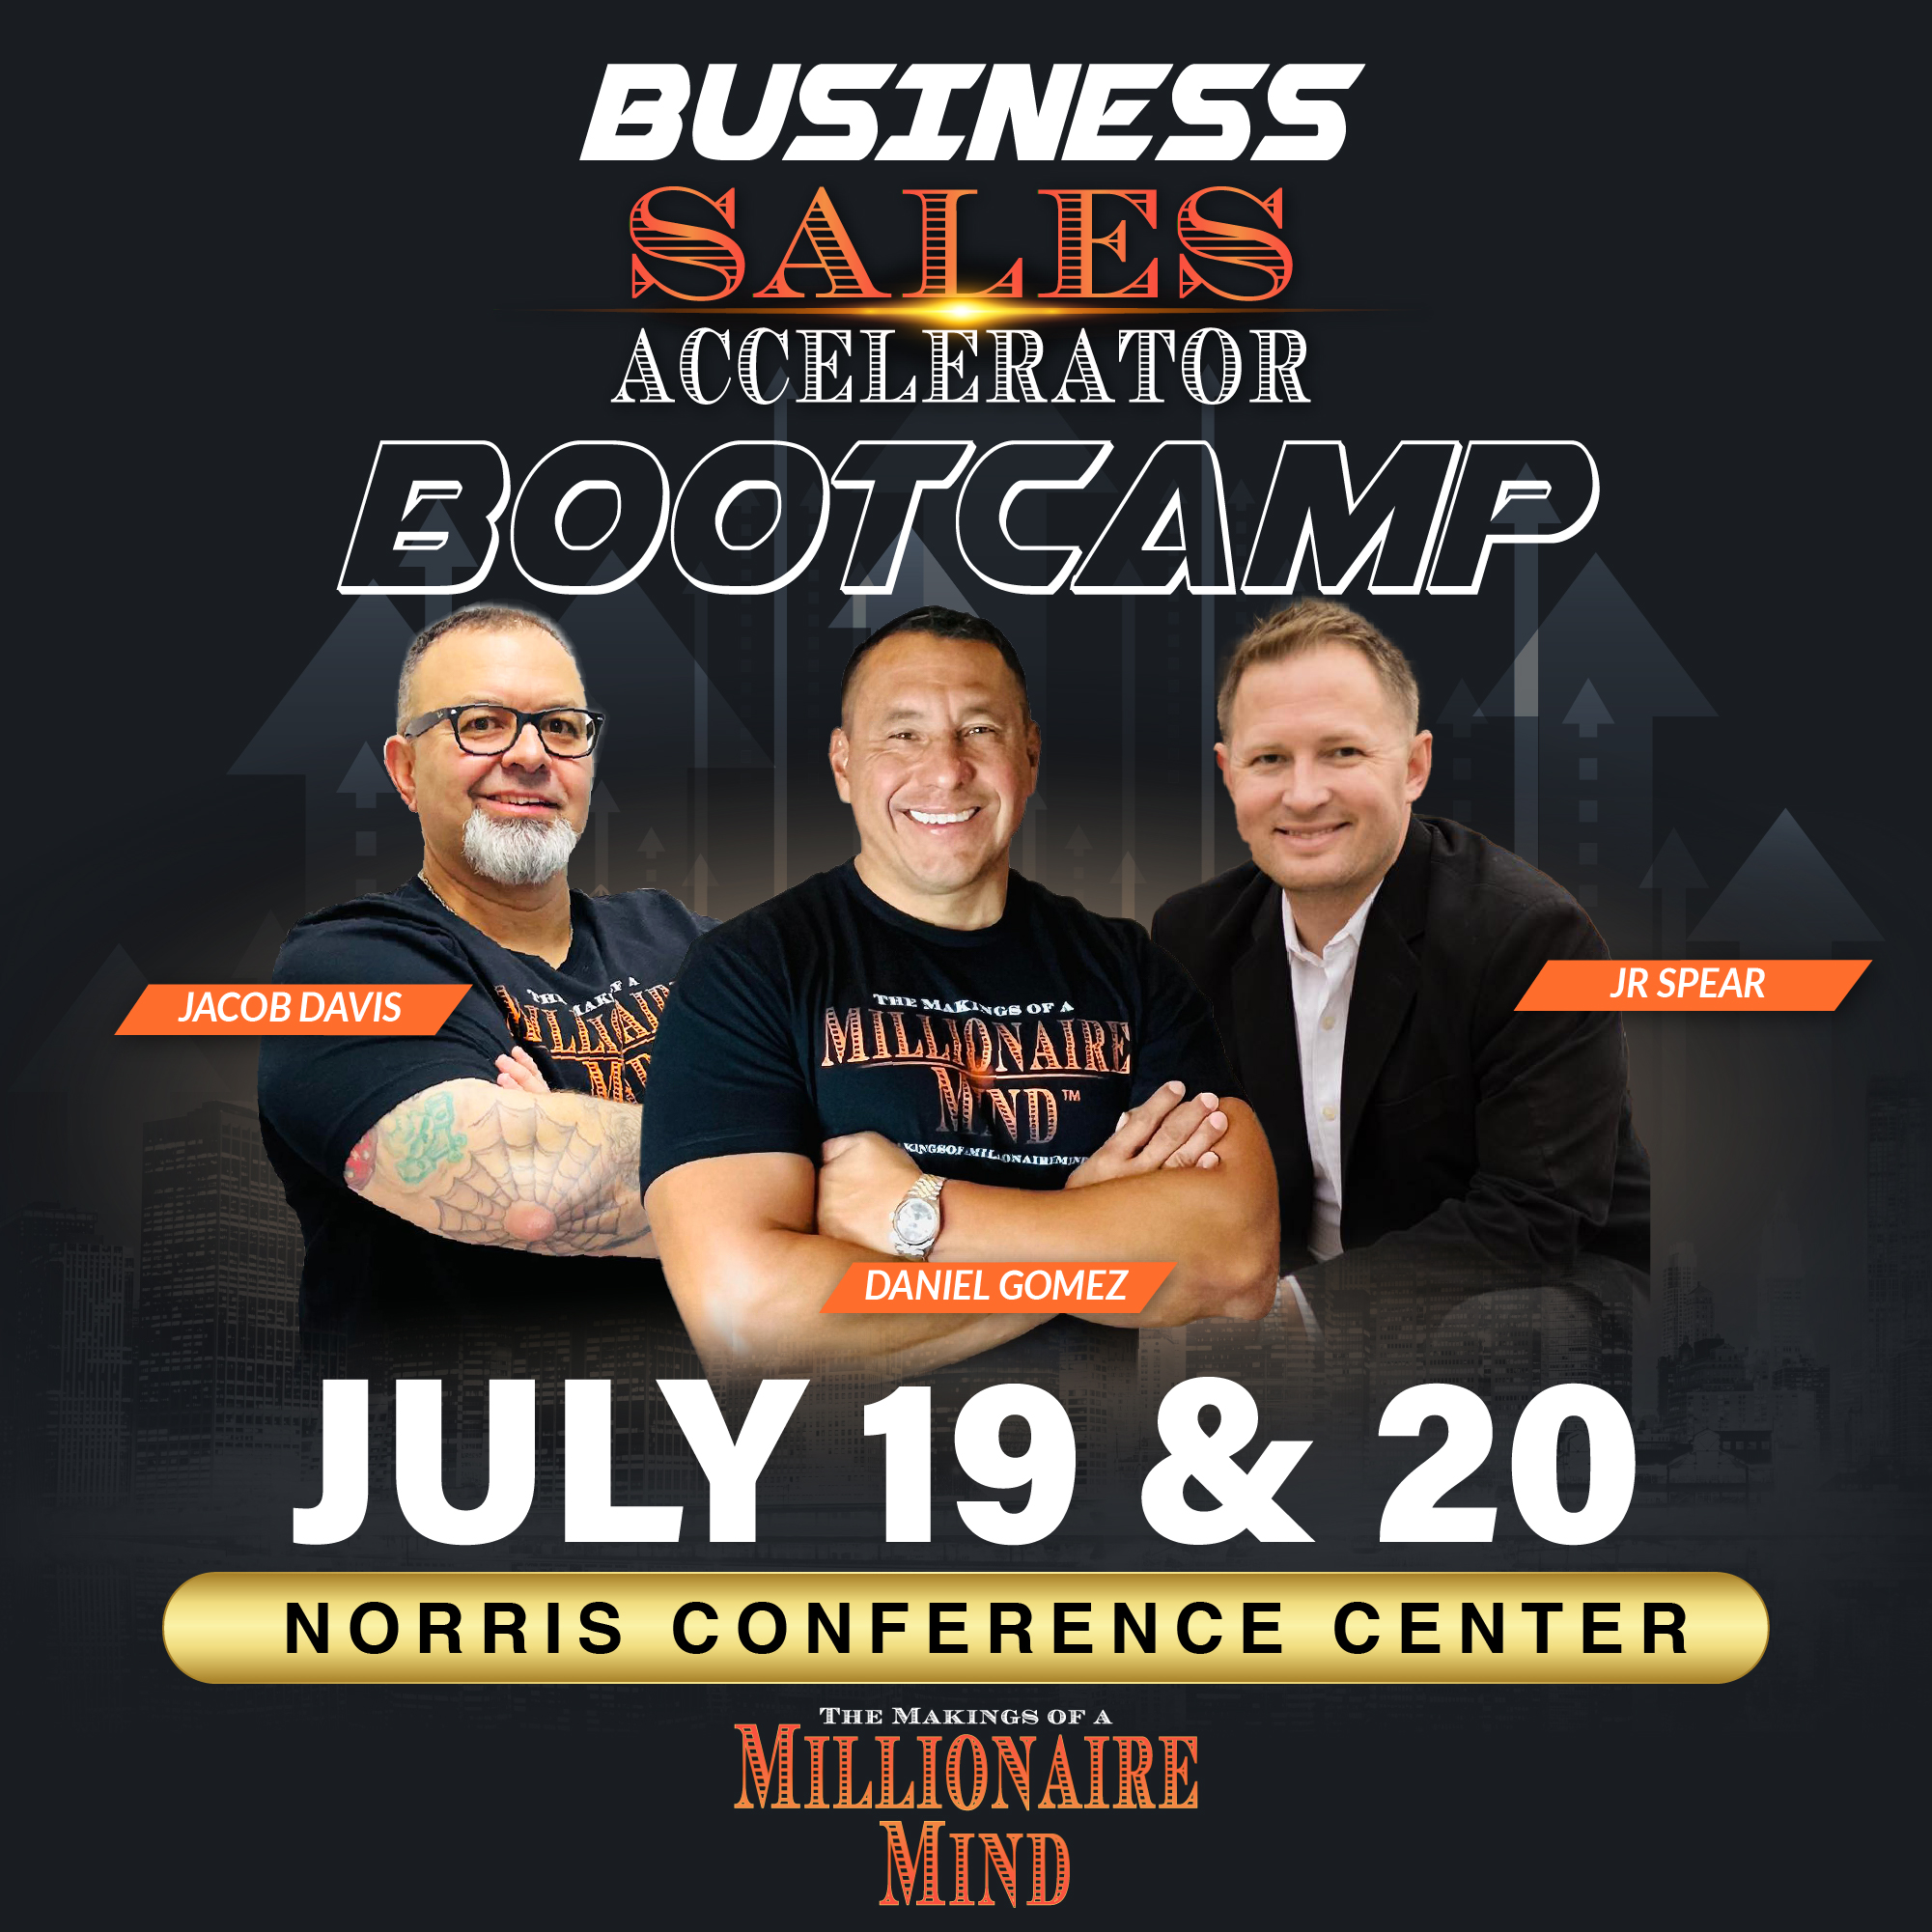 Promotional image for "Business Sales Accelerator Bootcamp" featuring presenters Jacob Davis, Daniel Gomez, and JR Spear. Scheduled for July 19 & 20 at Norris Conference Center, the image includes portraits of the three speakers and underscores achieving business growth from the comfort of home.